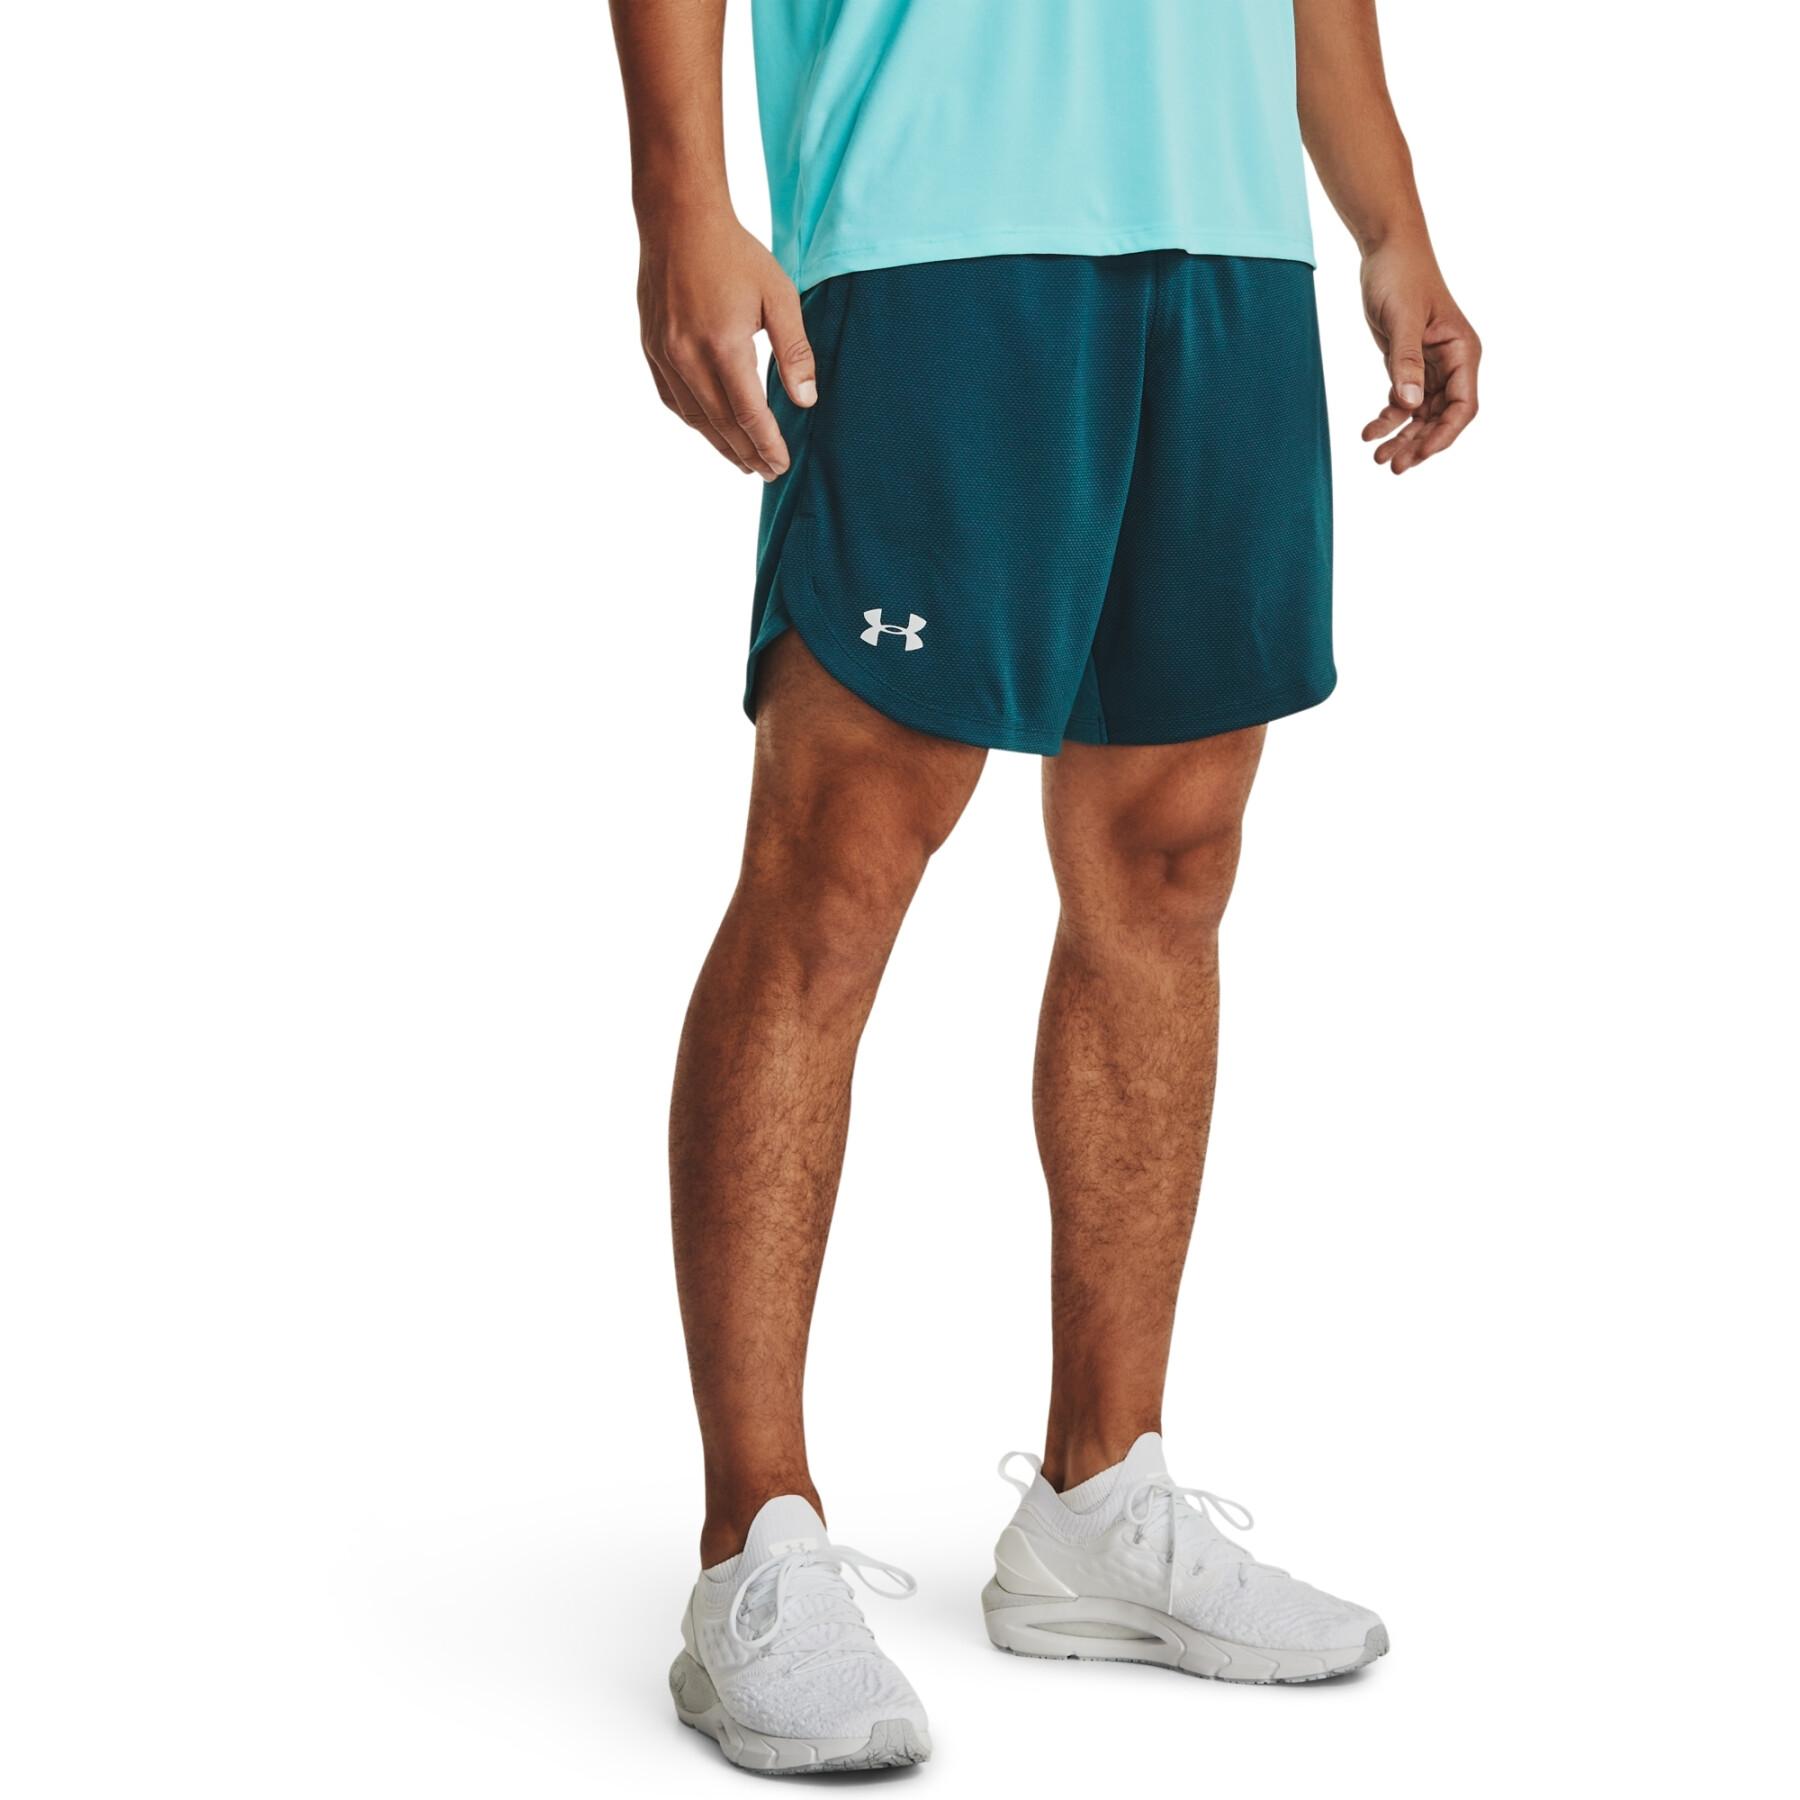 Training shorts Under Armour Knit Performance